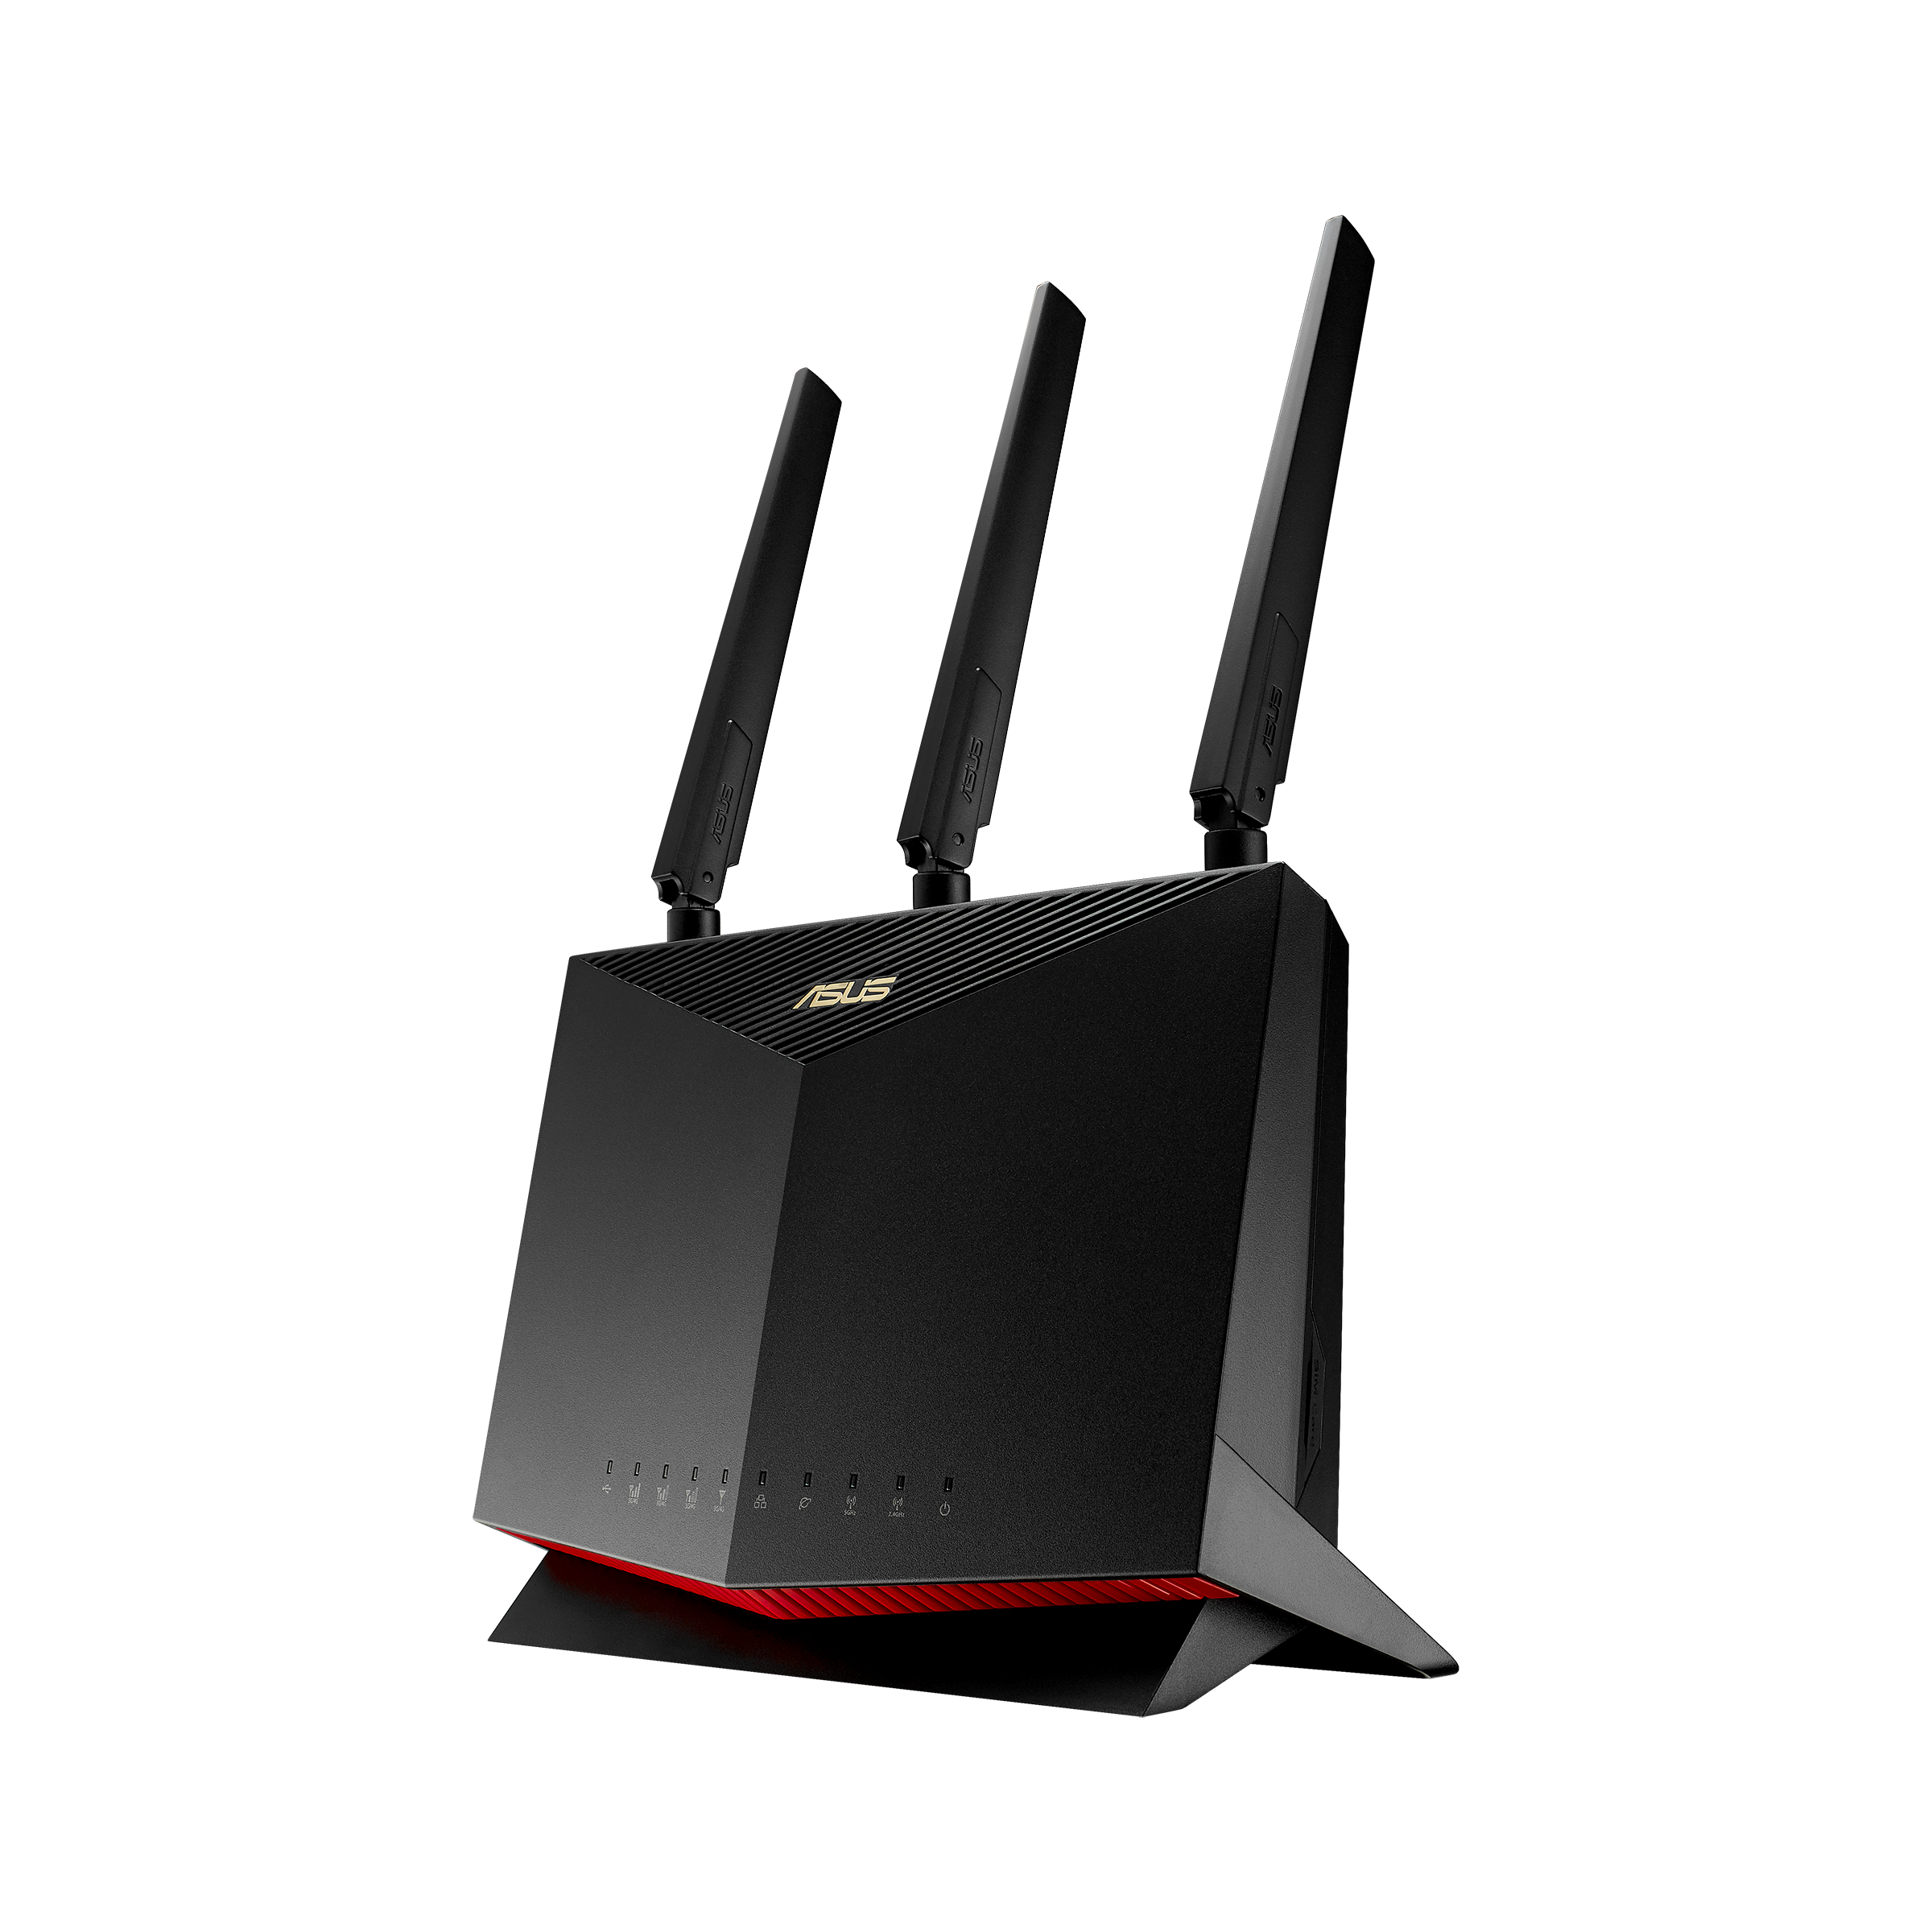 Wireless Router,WiFi Wireless Router,4G LTE Wireless Router Support 4G SIM Card,Dual Band Samrt WiFi Router,AC High Power,